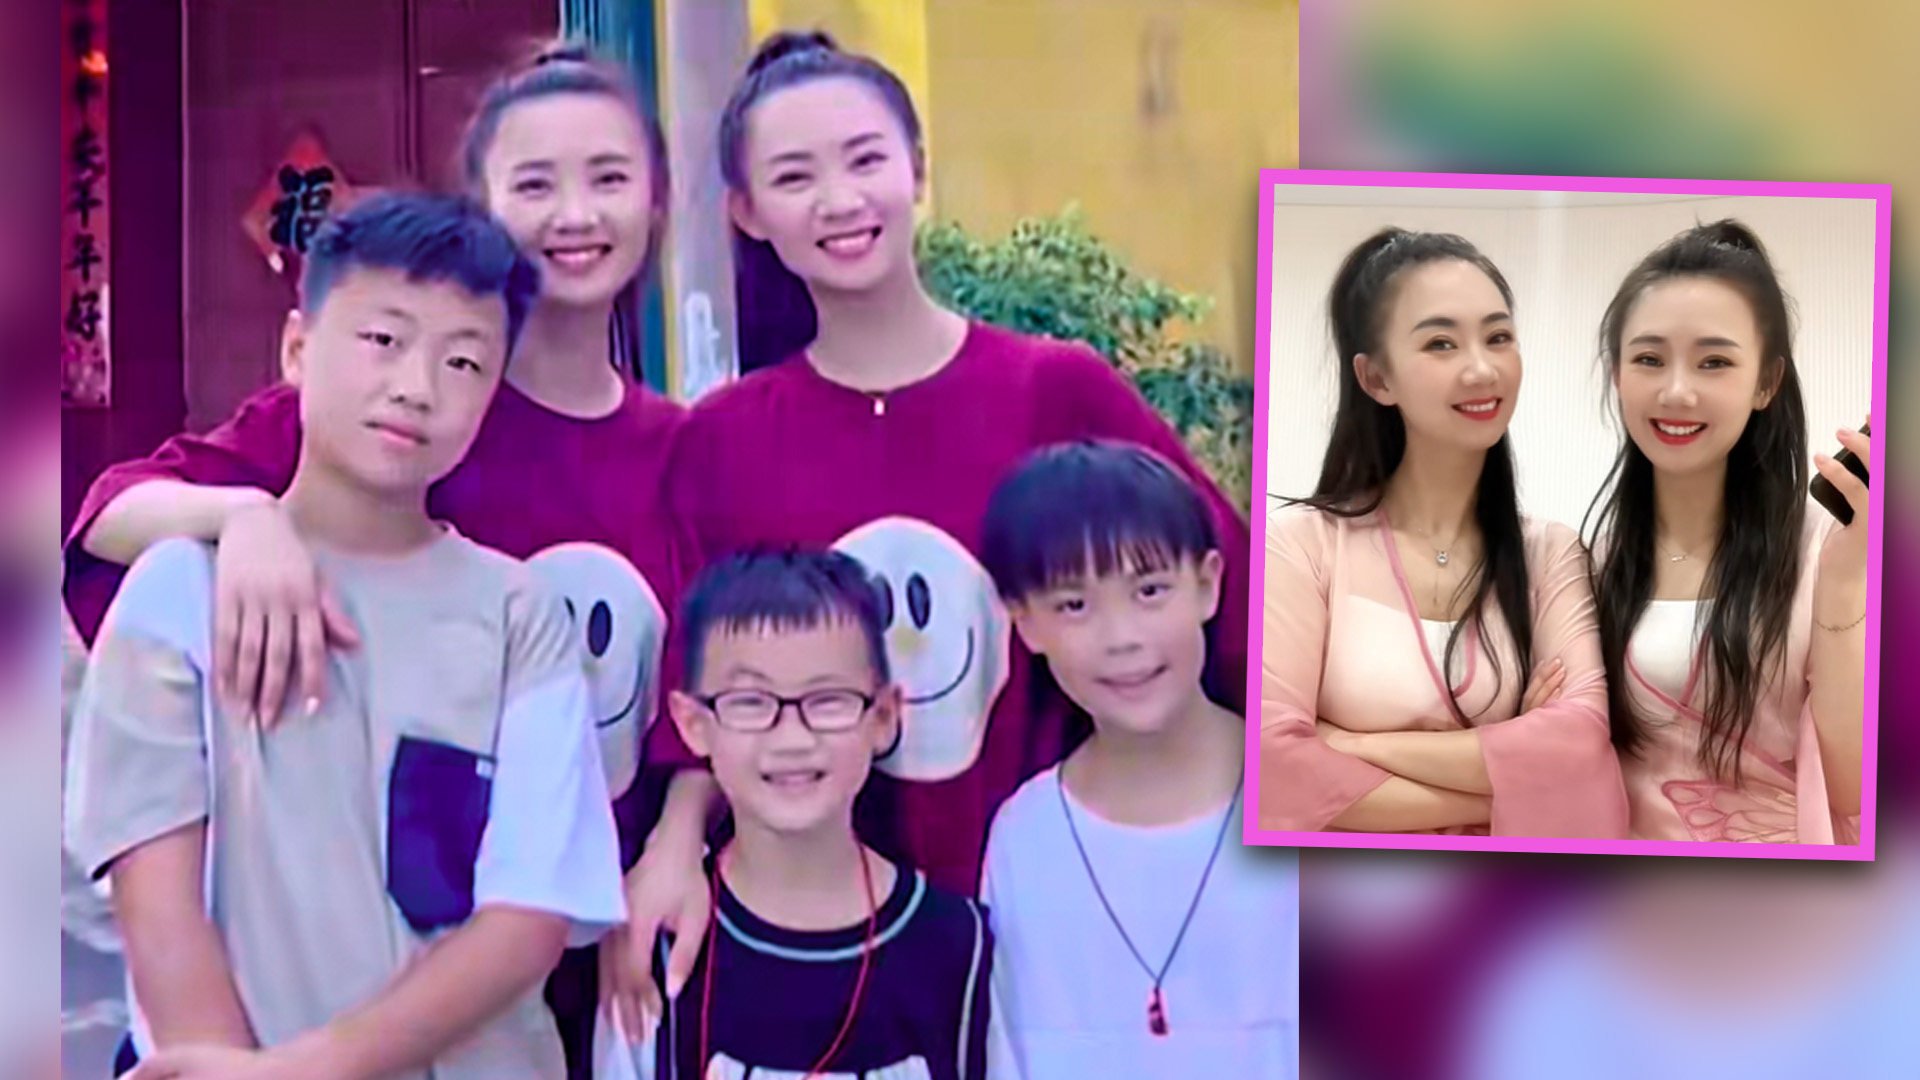 Twin sisters in China who have been reunited after three decades apart, share the identical hairstyle, fashion sense and even gave their sons the same name. Photo: SCMP composite/Baidu/Douyin